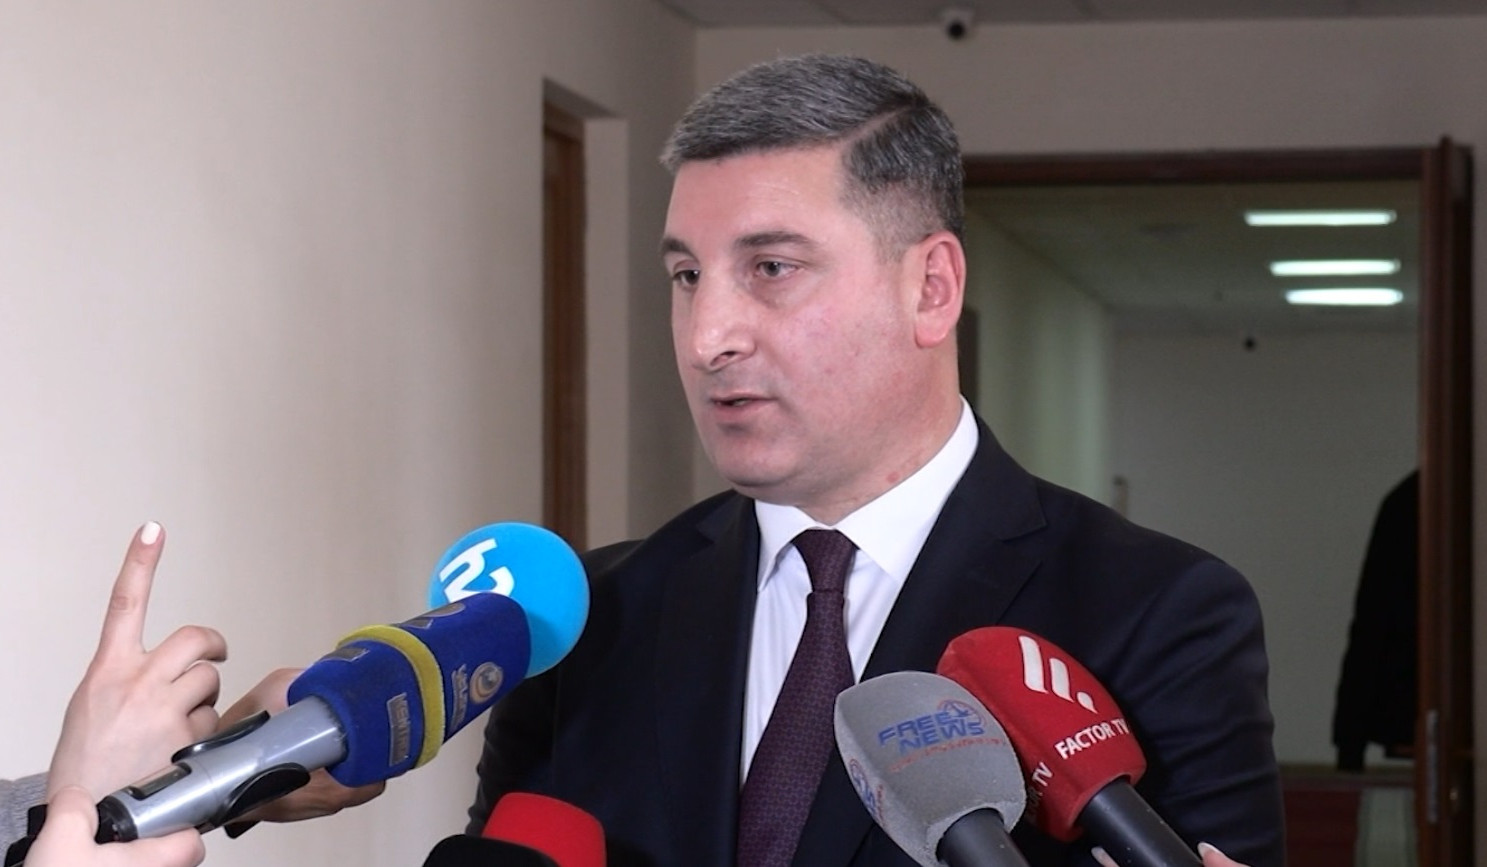 Every department, when it sees that there are problems, thinks about directions of their solution: Sanosyan on delimitation process